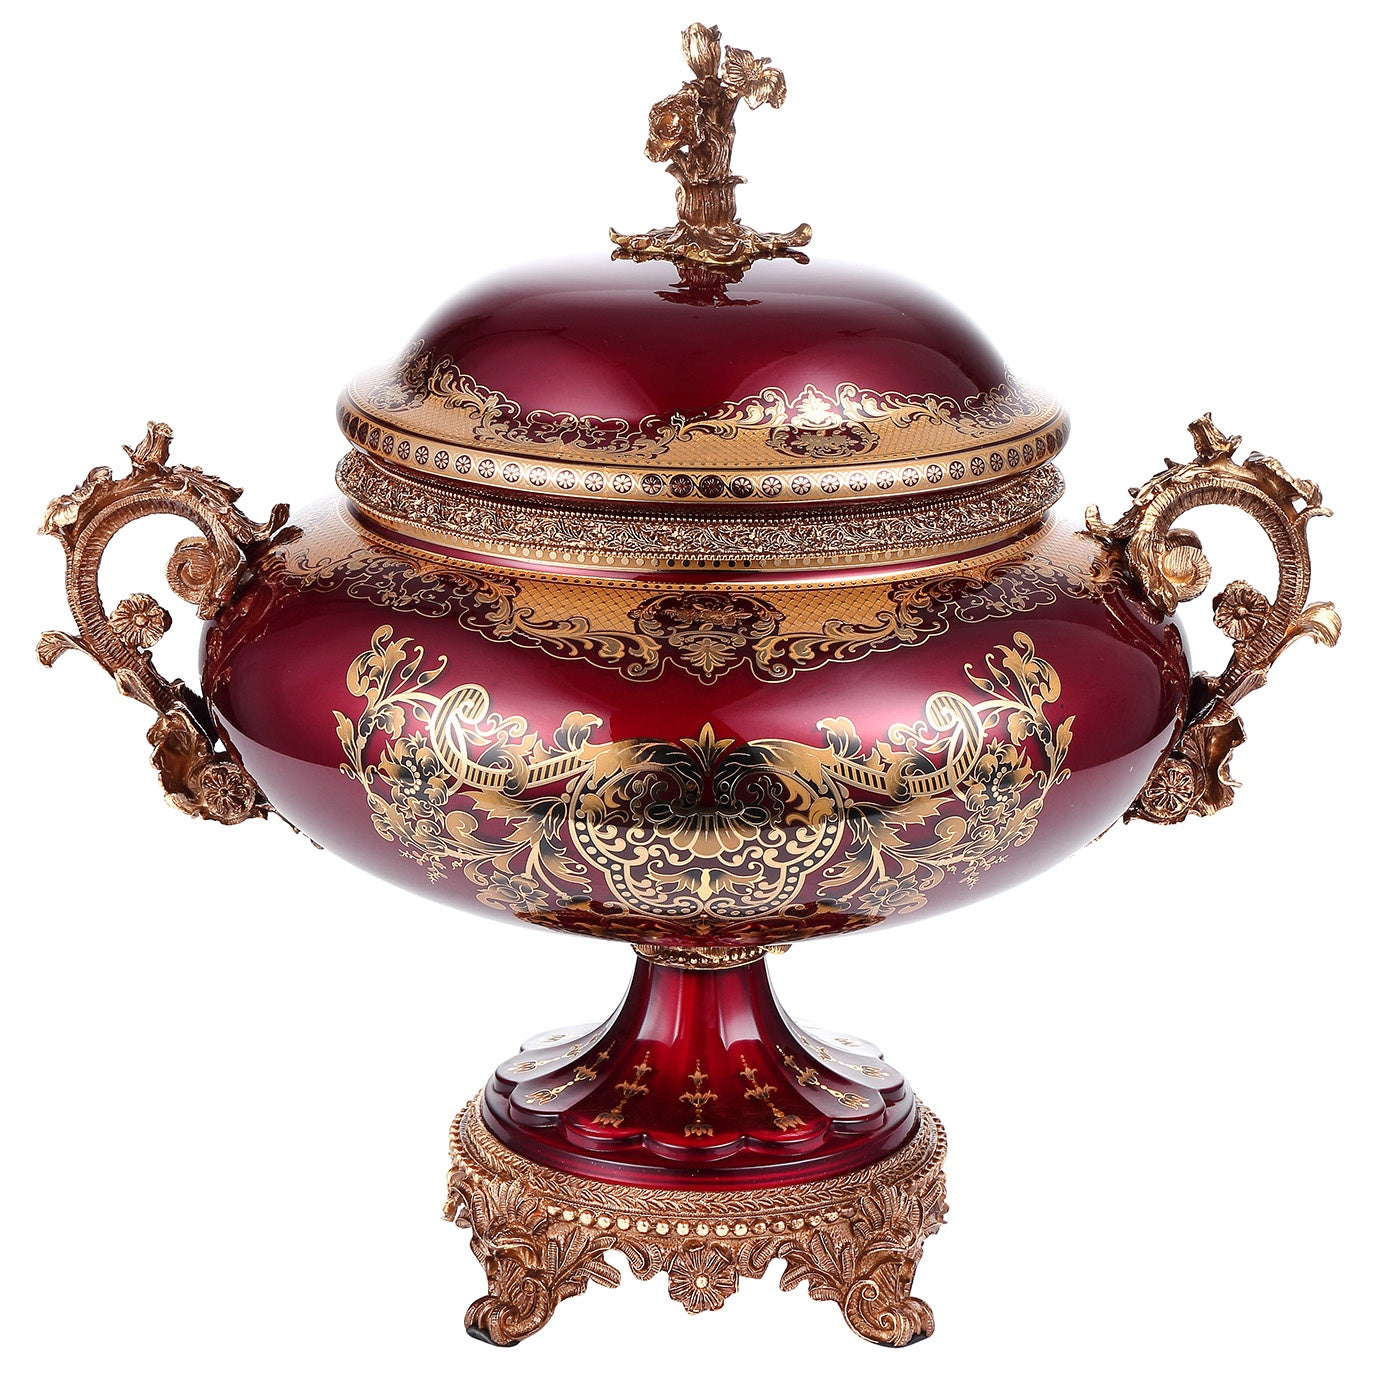 Urn in Bronze & Ruby Red & Gold Finish AC6009XL European Traditional Victorian